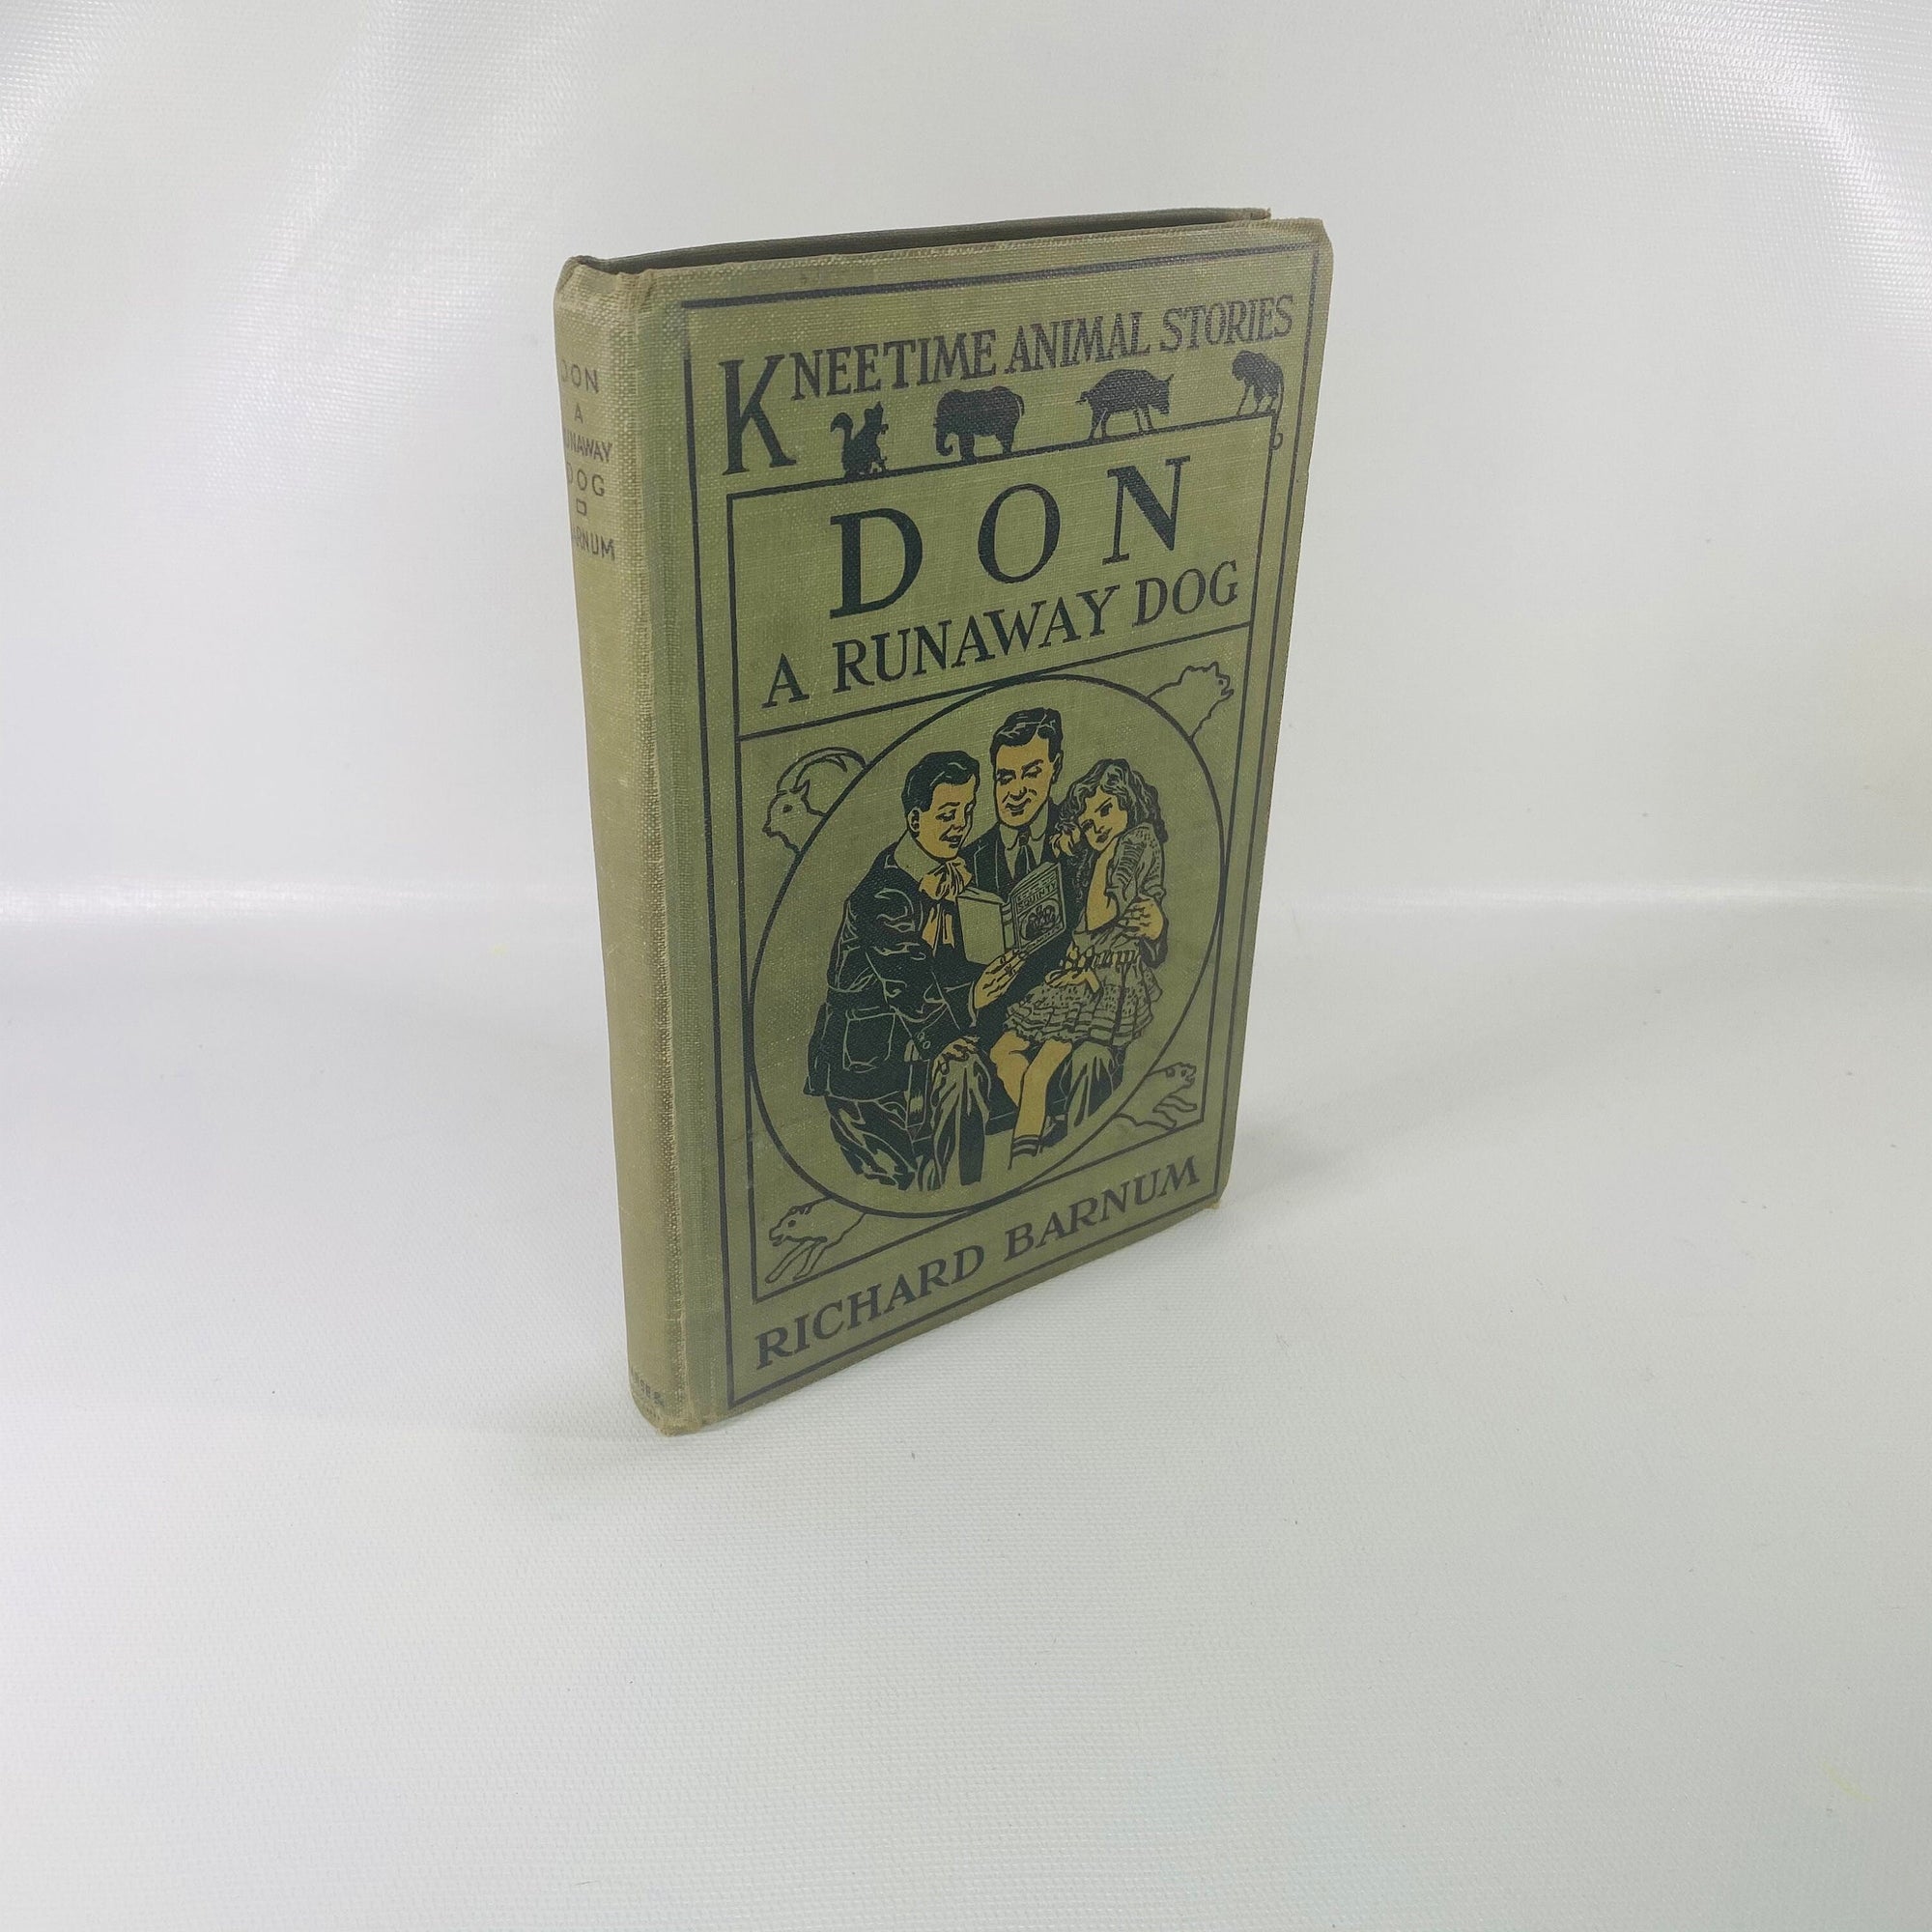 Don a Runaway Dog by Richard Barnum A Kneetime Animal Stories 1915 Barse & HopkinsVintage Book